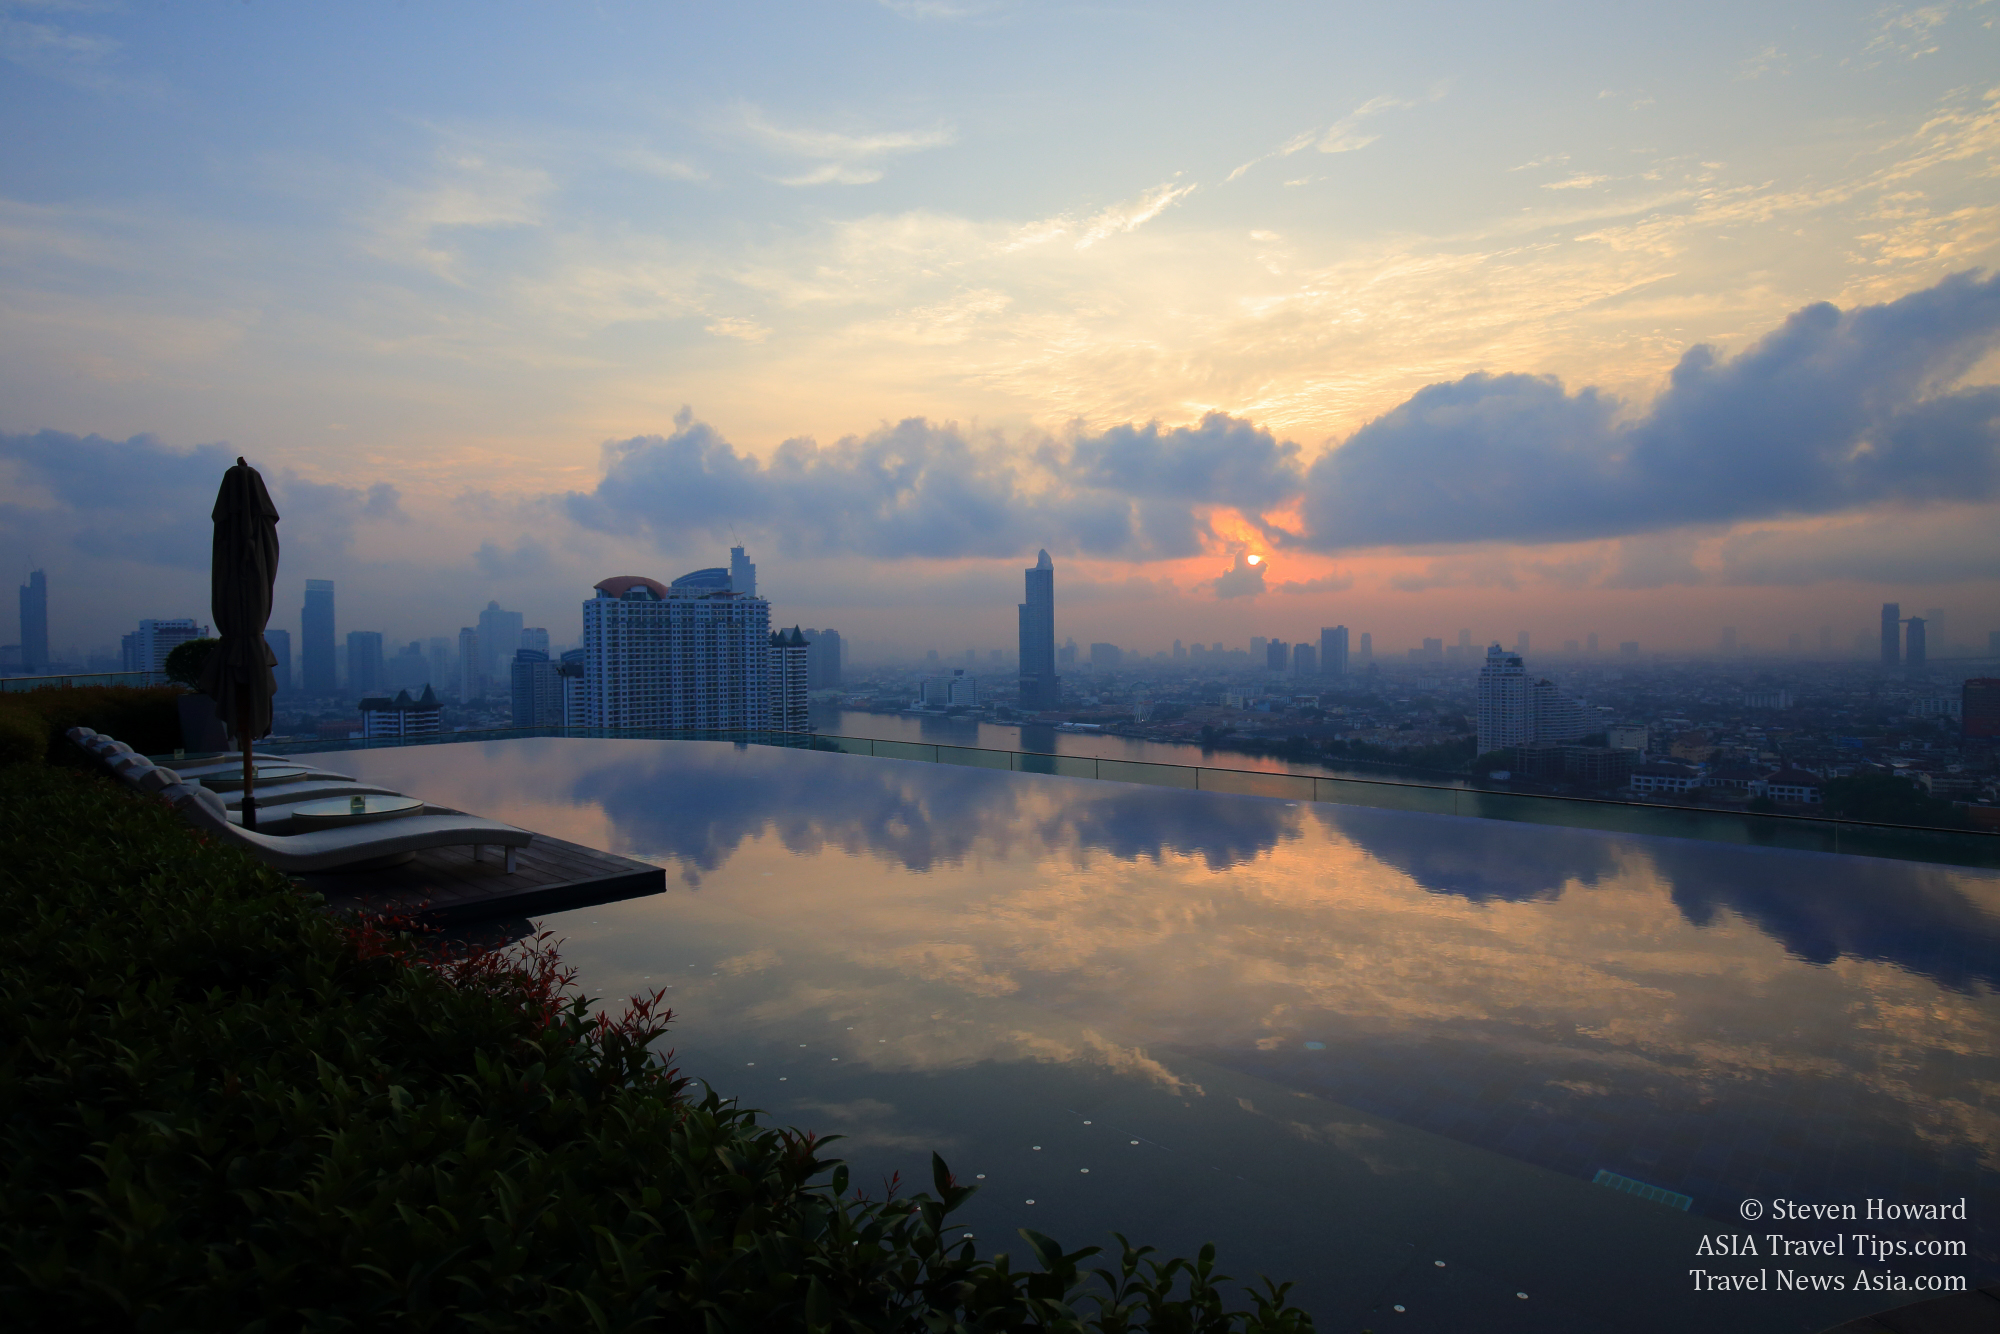 Great views from the Avani+ Riverside Hotel in Bangkok, Thailand. Picture by Steven Howard of TravelNewsAsia.com Click to enlarge.